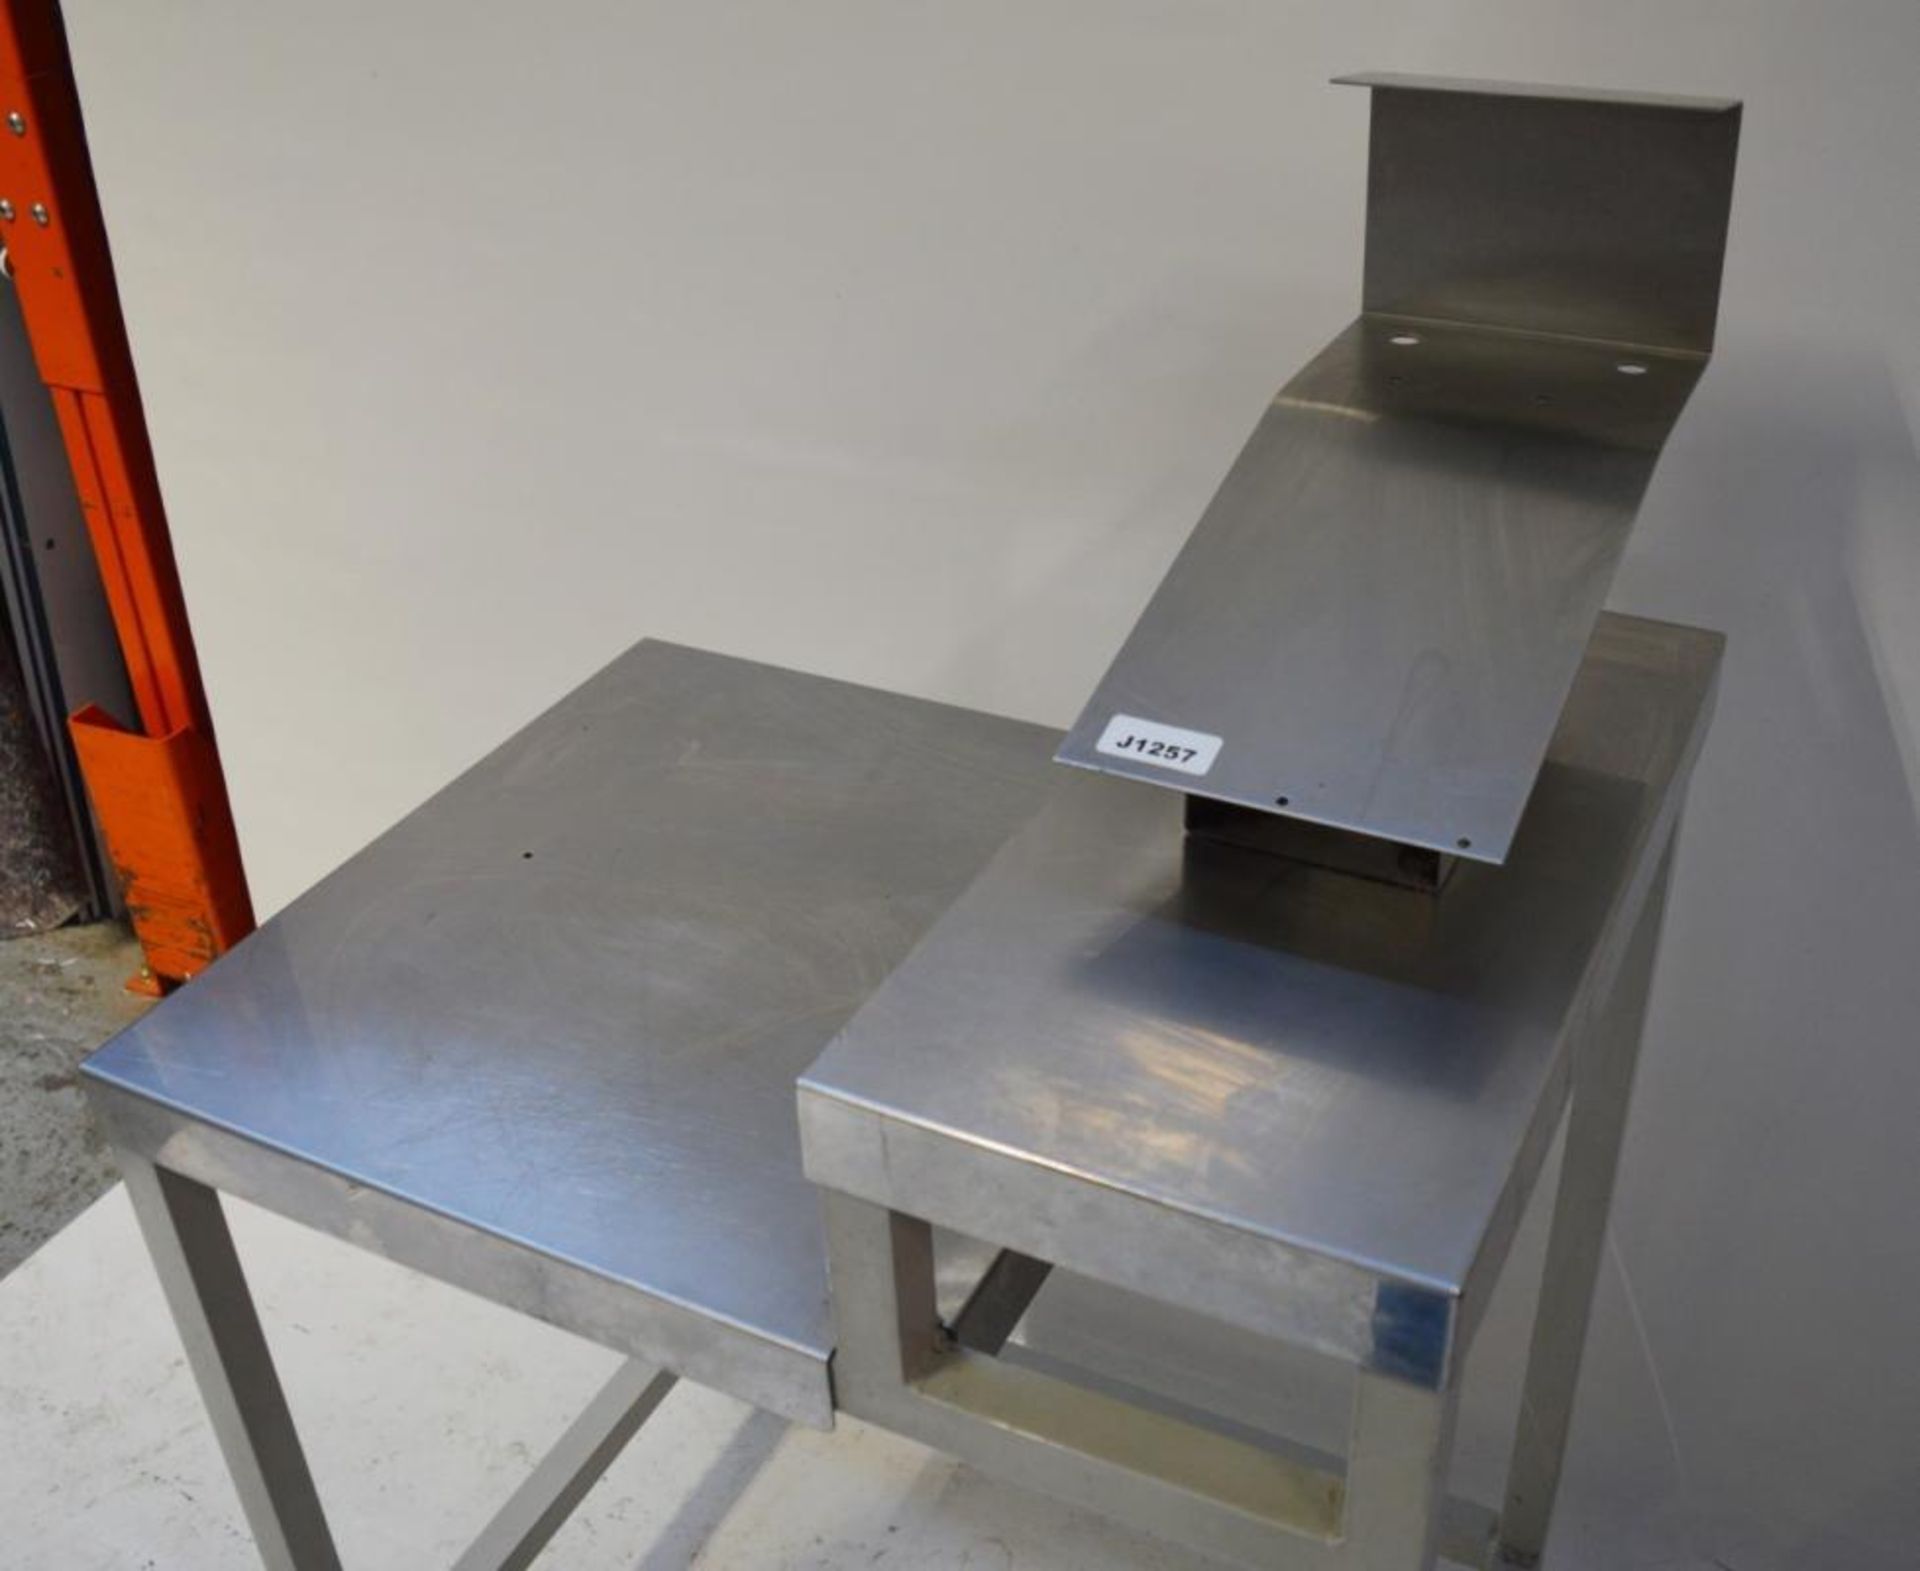 1 x Preperation Work Table With Stainless Steel Top - CL232 - Ref J1257 - H75/89.5 x W71 x D52 cms - - Image 2 of 3